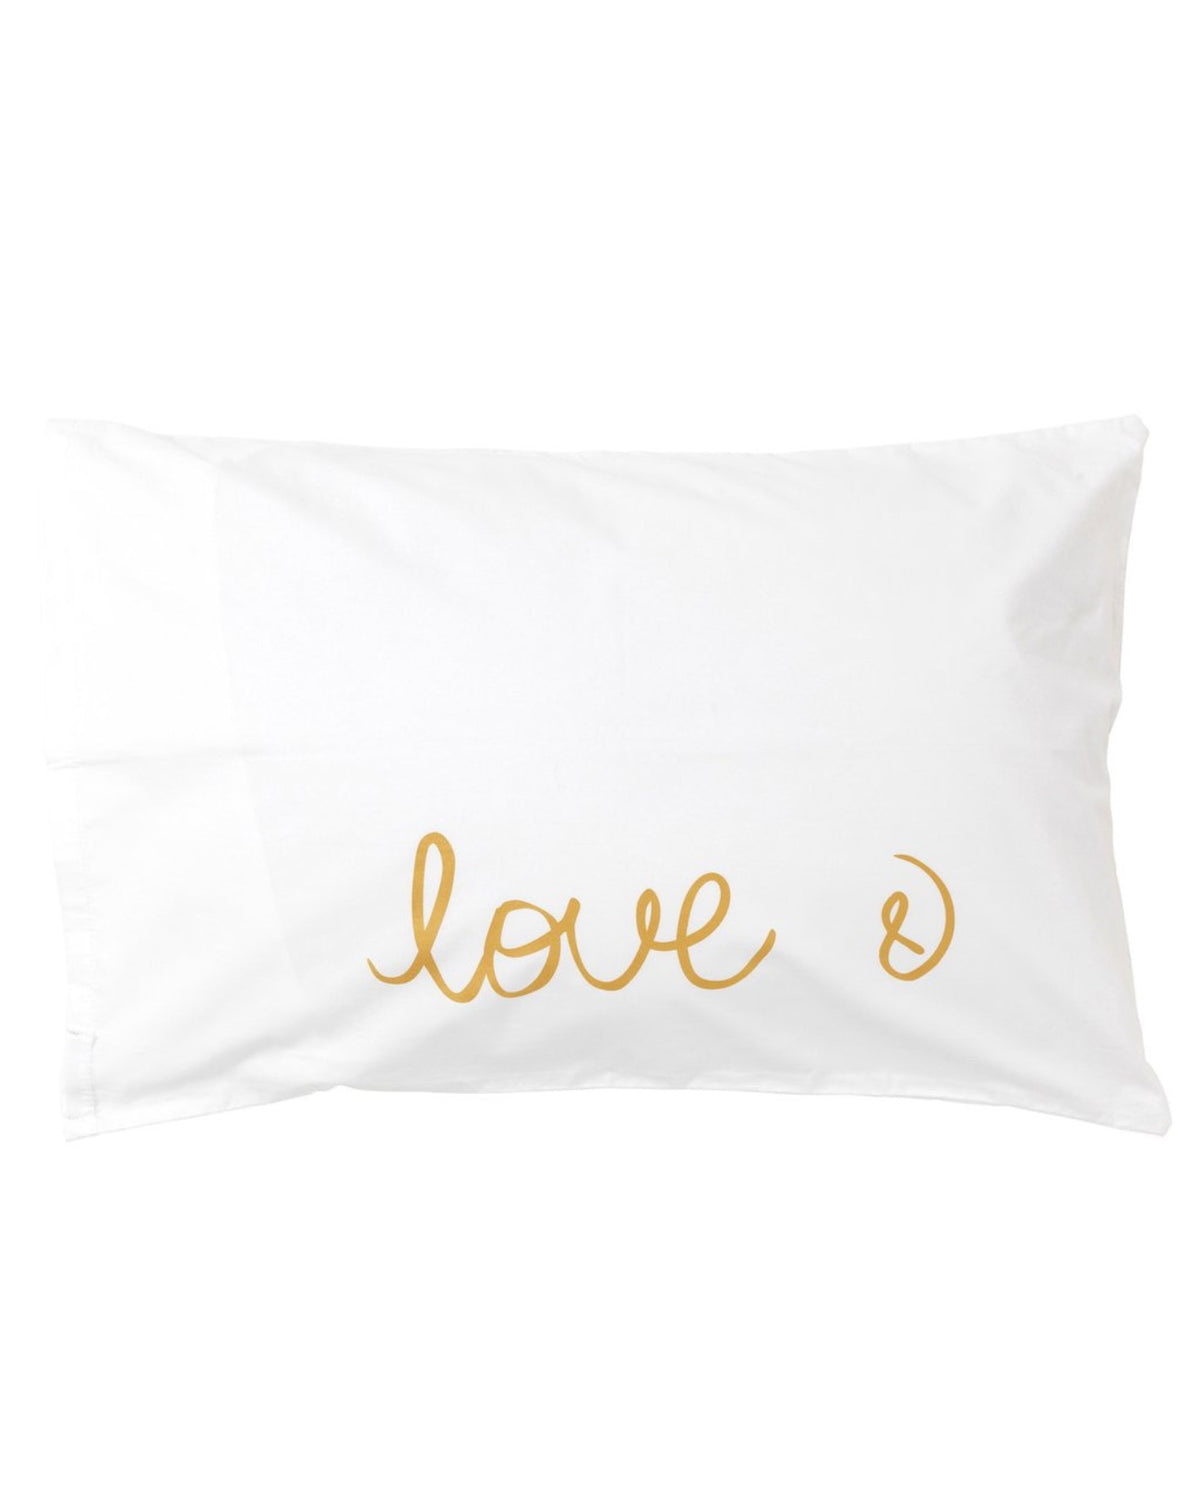 Our gorgeous gold 'love &' Pillowcase is way too cute! The message leaves the question of what comes with love - is it happiness or joy or cuddles? at bedtime it's a great way to create a special moment with your child and settle them into bed. 100% cotton and machine washable.  Standard Size: 48 x 73 cm  